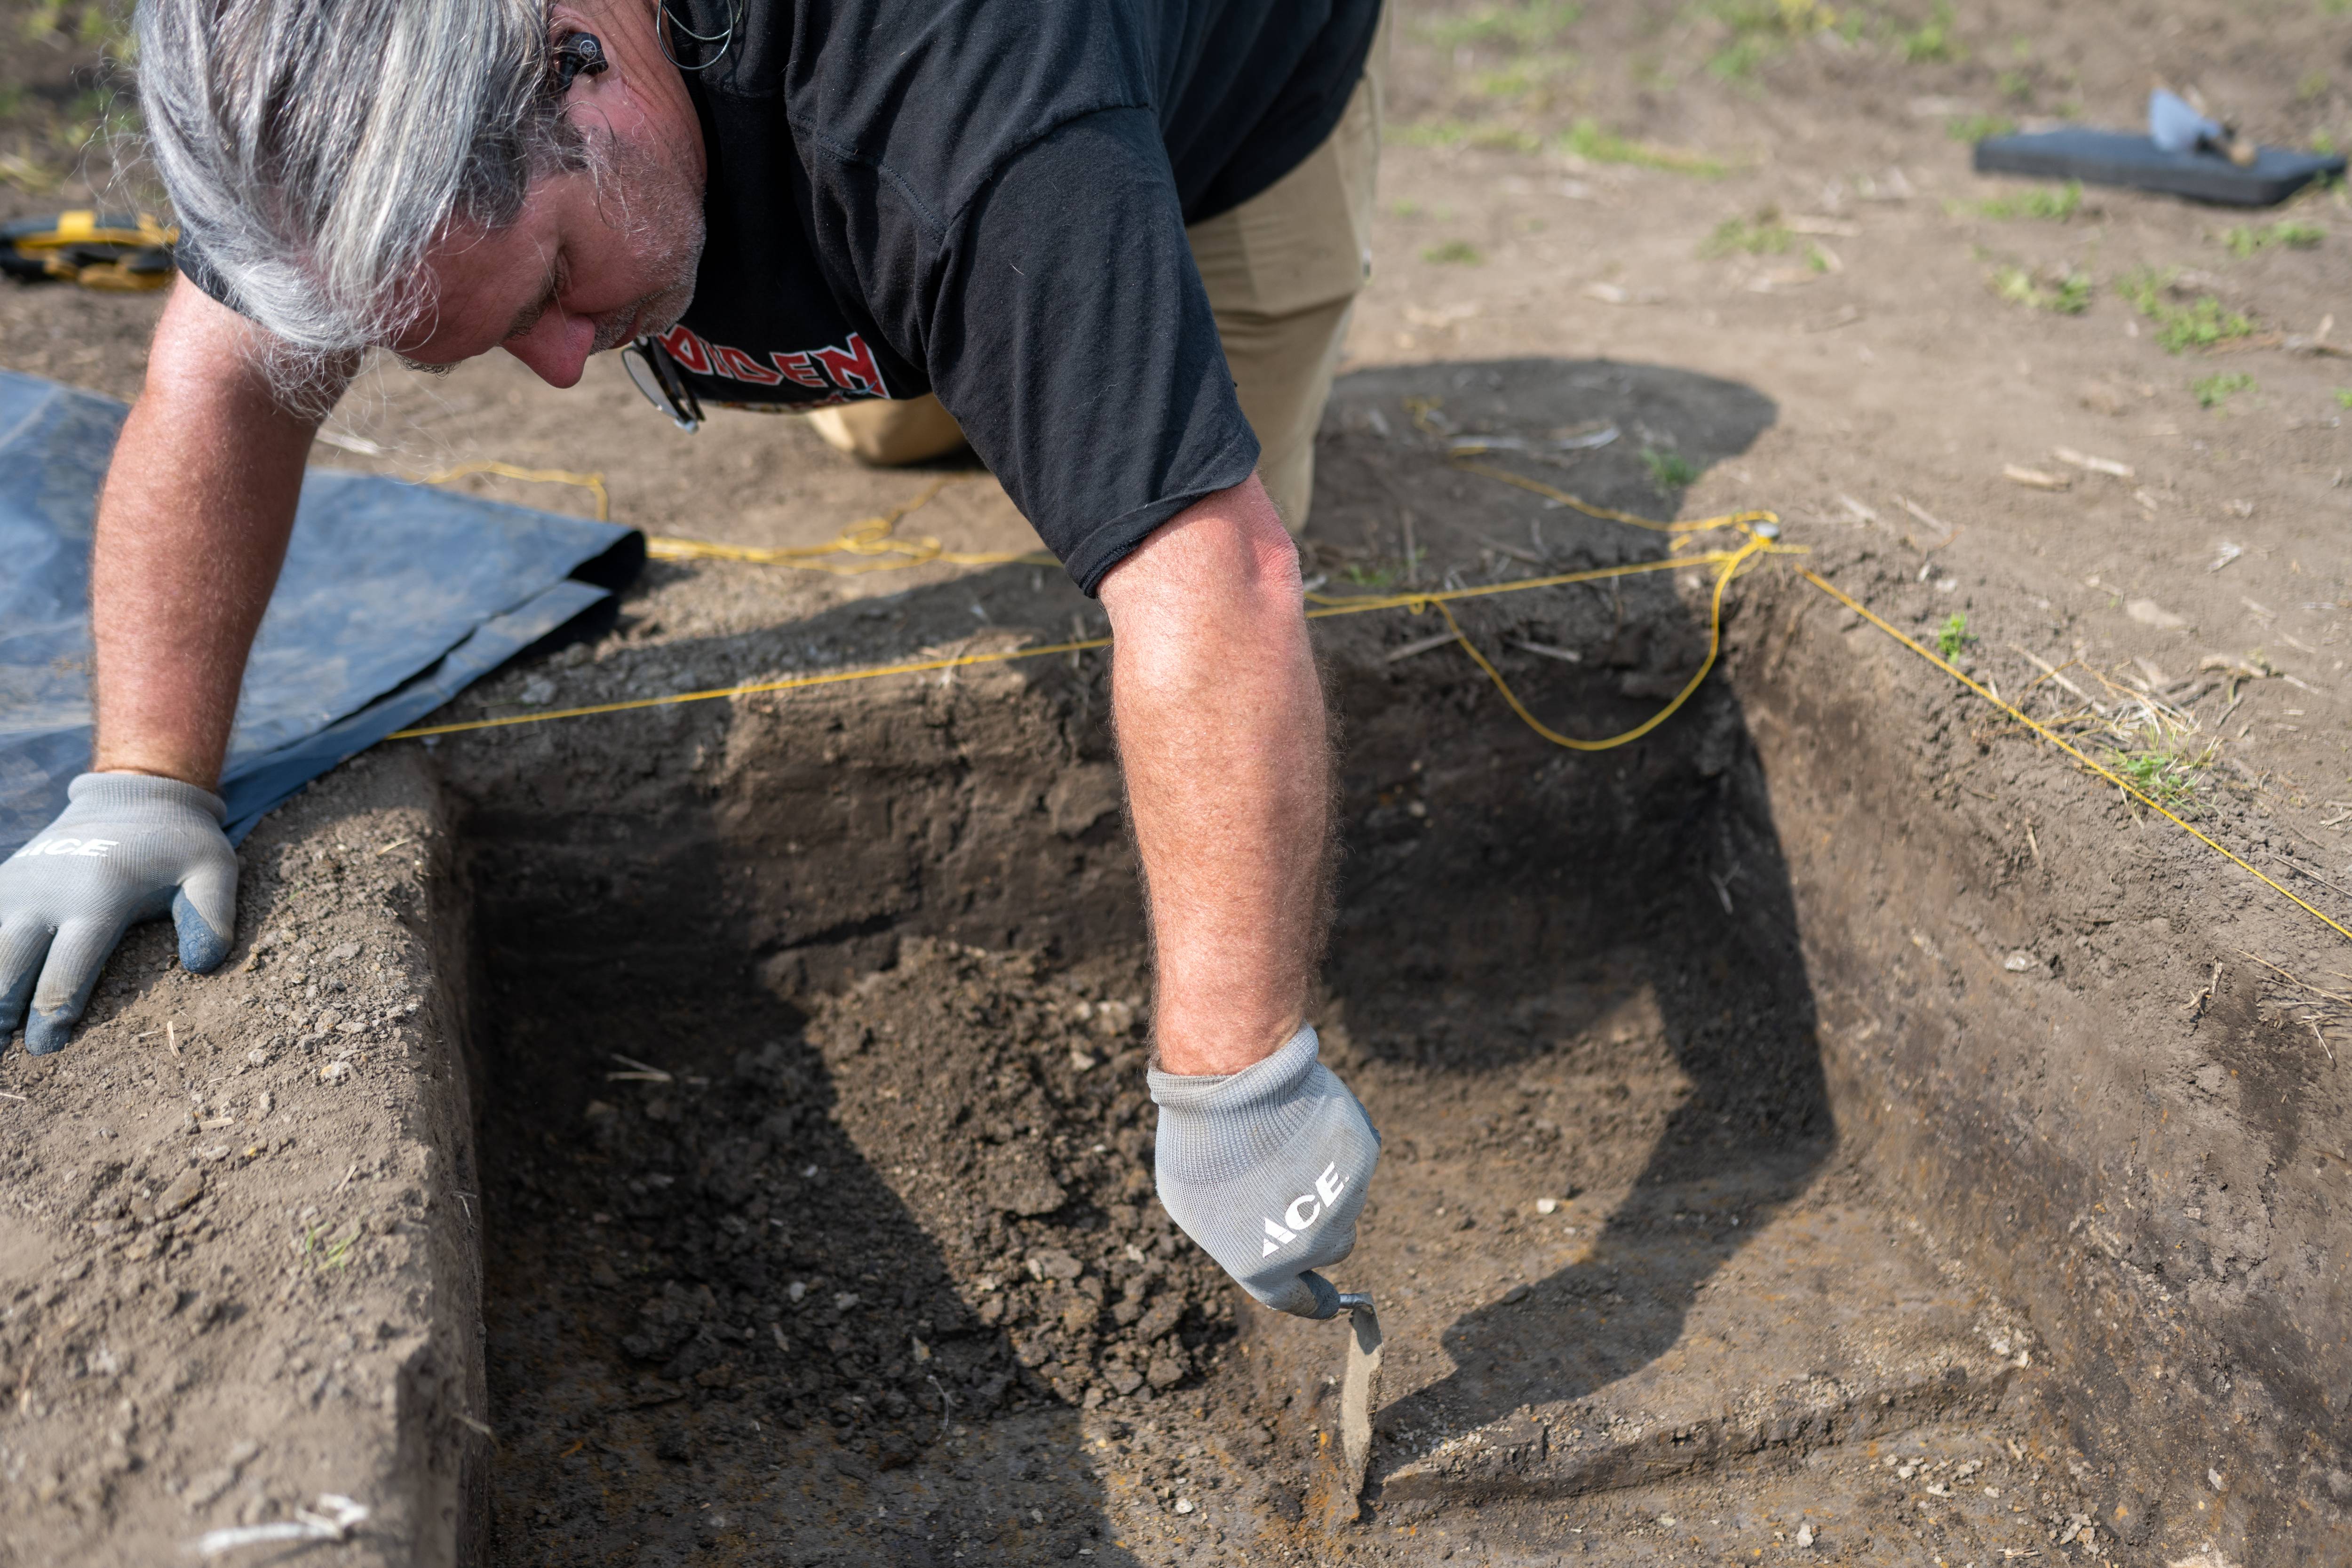 Making amazing discoveries: David Lamp used a trowel to dig layer by layer, where one of his finds was a once-in-a-lifetime Clovis point. Photo by Ben Siegel